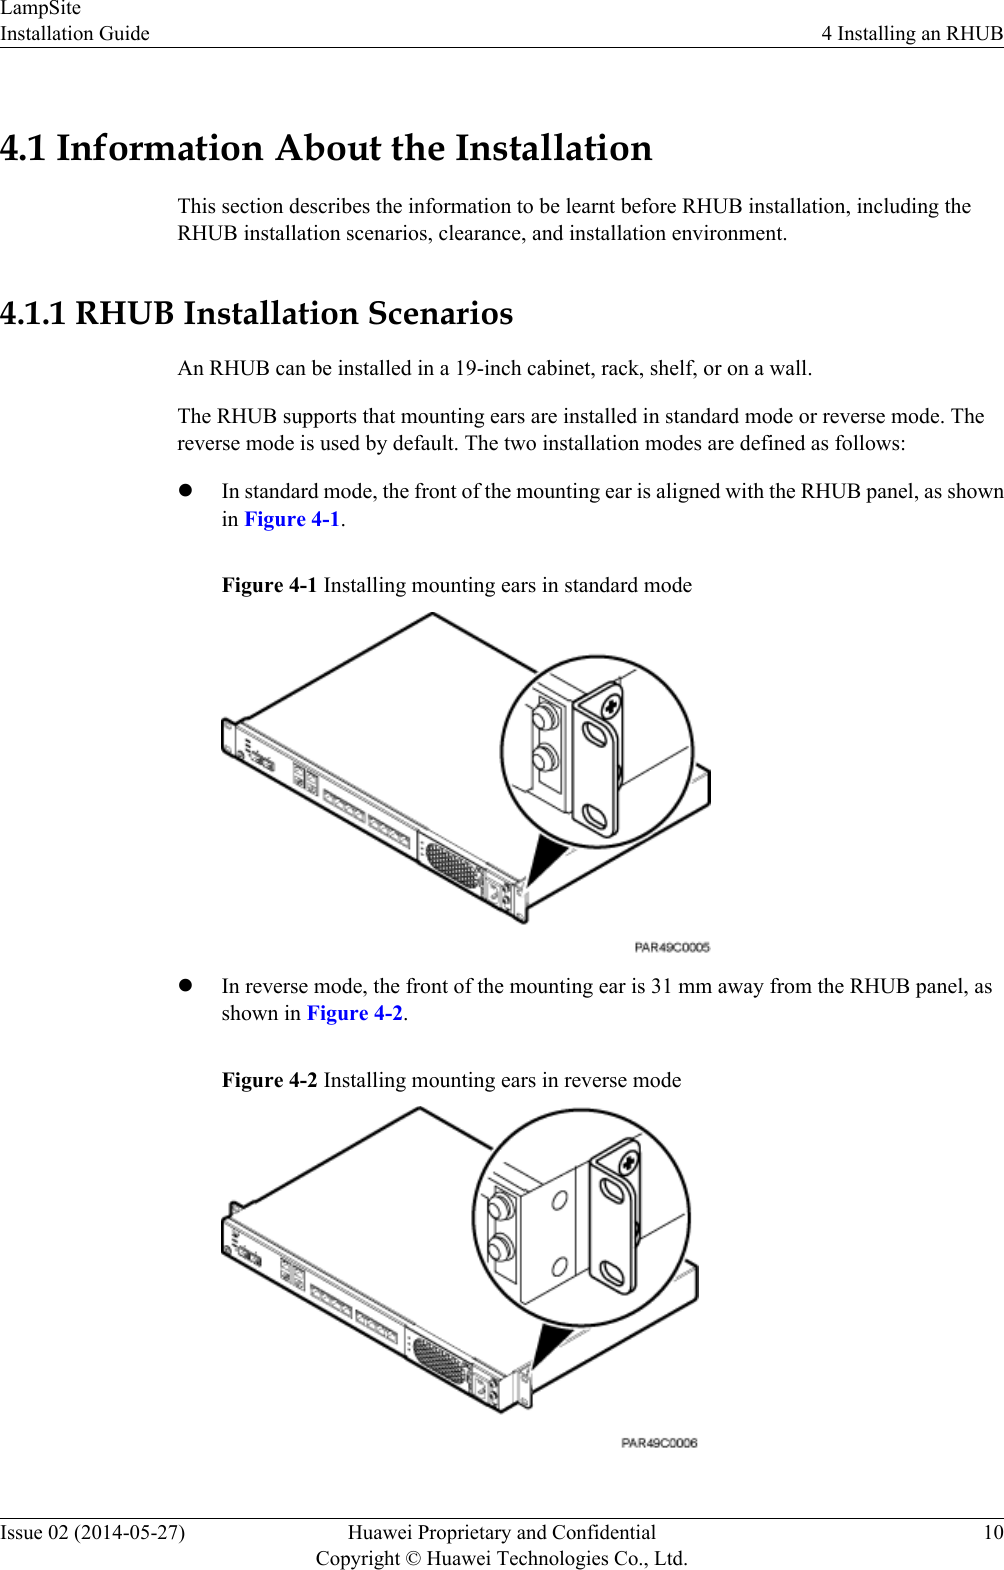 4.1 Information About the InstallationThis section describes the information to be learnt before RHUB installation, including theRHUB installation scenarios, clearance, and installation environment.4.1.1 RHUB Installation ScenariosAn RHUB can be installed in a 19-inch cabinet, rack, shelf, or on a wall.The RHUB supports that mounting ears are installed in standard mode or reverse mode. Thereverse mode is used by default. The two installation modes are defined as follows:lIn standard mode, the front of the mounting ear is aligned with the RHUB panel, as shownin Figure 4-1.Figure 4-1 Installing mounting ears in standard modelIn reverse mode, the front of the mounting ear is 31 mm away from the RHUB panel, asshown in Figure 4-2.Figure 4-2 Installing mounting ears in reverse modeLampSiteInstallation Guide 4 Installing an RHUBIssue 02 (2014-05-27) Huawei Proprietary and ConfidentialCopyright © Huawei Technologies Co., Ltd.10